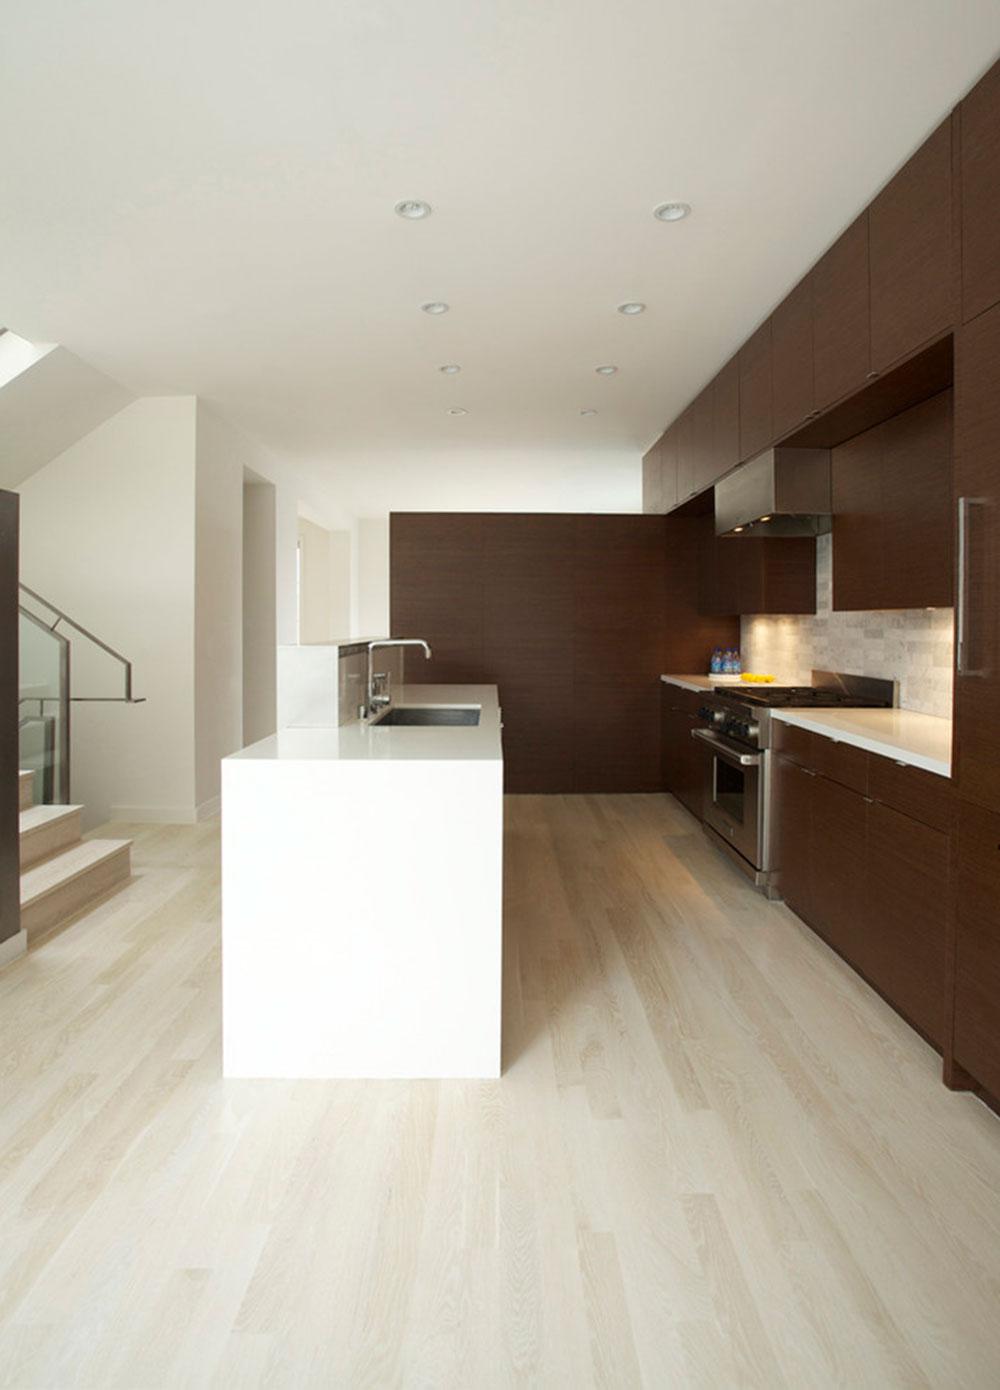 Guide-To-Choosing-The-Hardwood-Floor%E2%80%99s-Color4 Guide For Choosing The Hardwood Floor’s Color